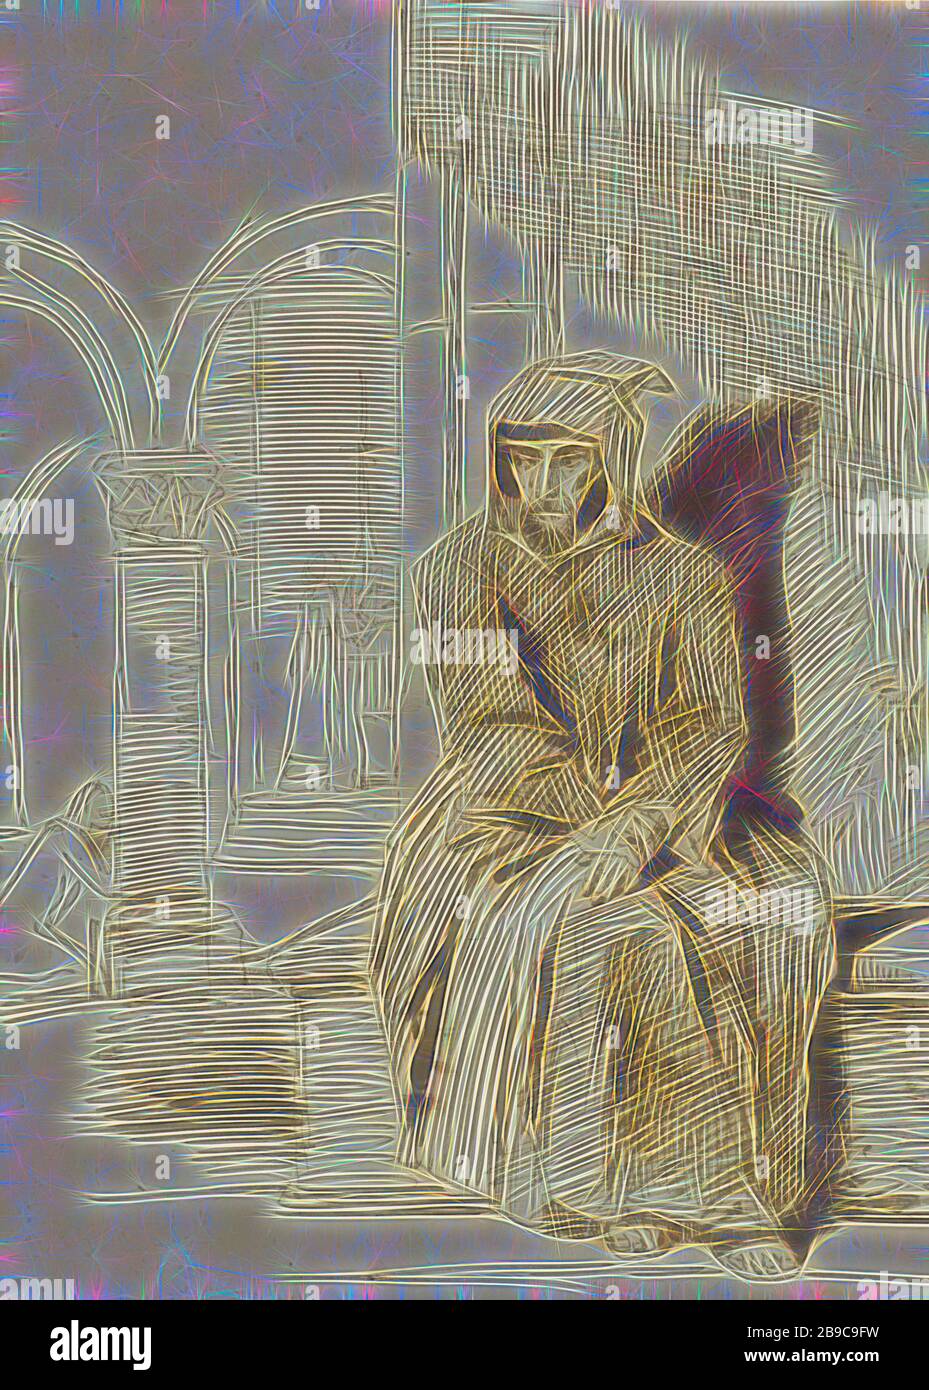 Seated monk, in contemplation, while mass is being celebrated in the background, Louis Boulanger, 1816 - 1867, paper, ink, brush, h 262 mm × w 190 mm, Reimagined by Gibon, design of warm cheerful glowing of brightness and light rays radiance. Classic art reinvented with a modern twist. Photography inspired by futurism, embracing dynamic energy of modern technology, movement, speed and revolutionize culture. Stock Photo